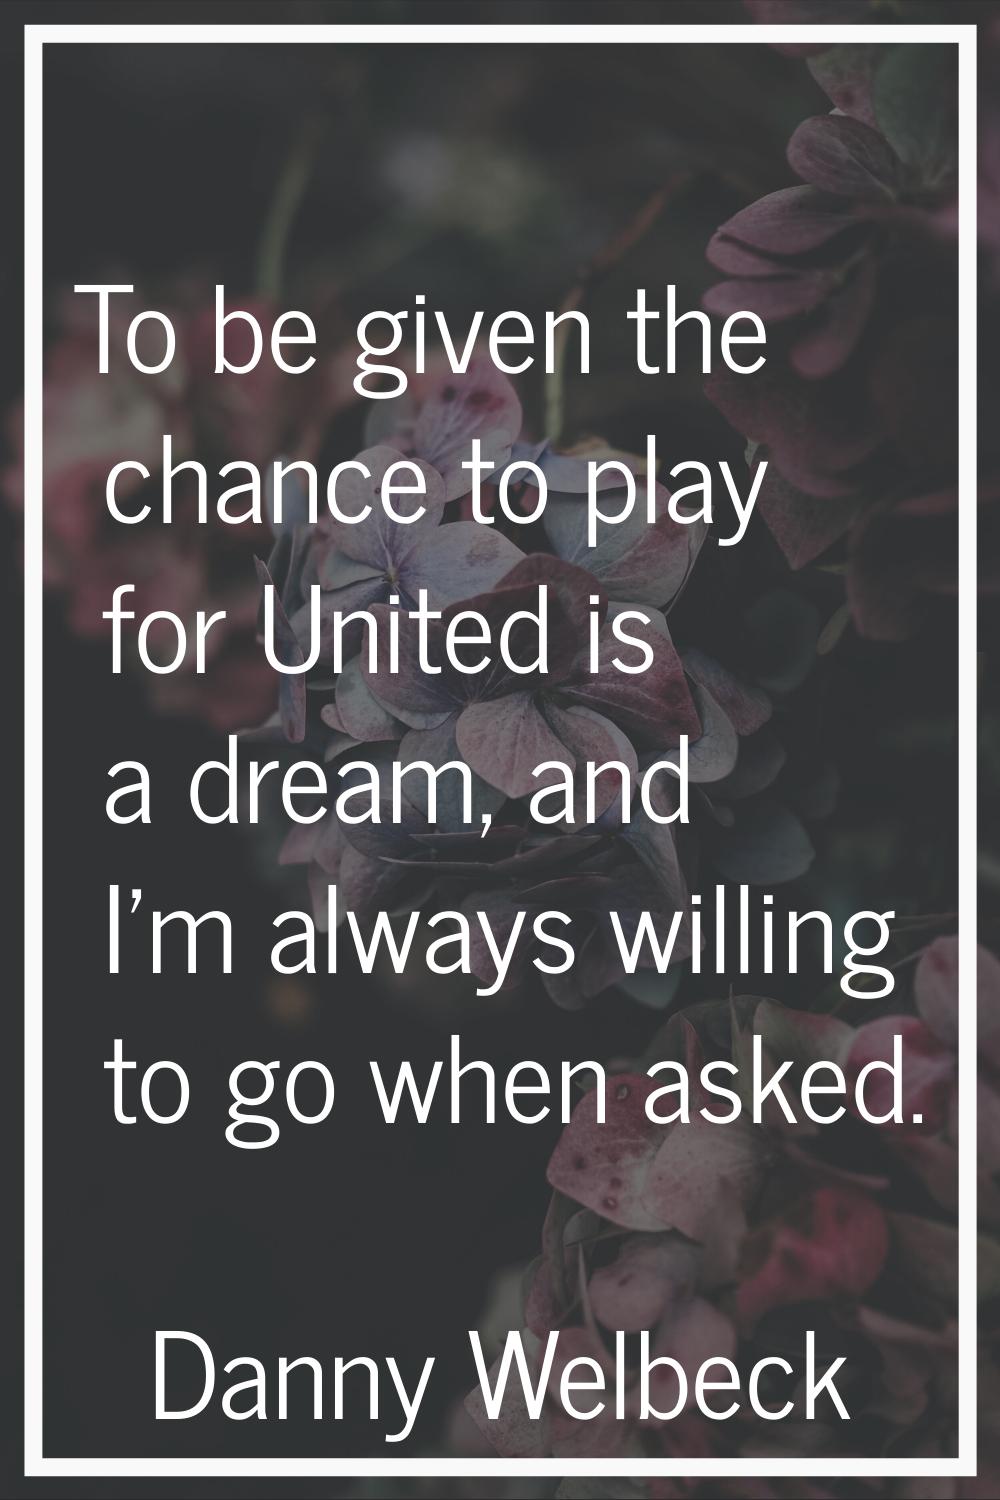 To be given the chance to play for United is a dream, and I'm always willing to go when asked.